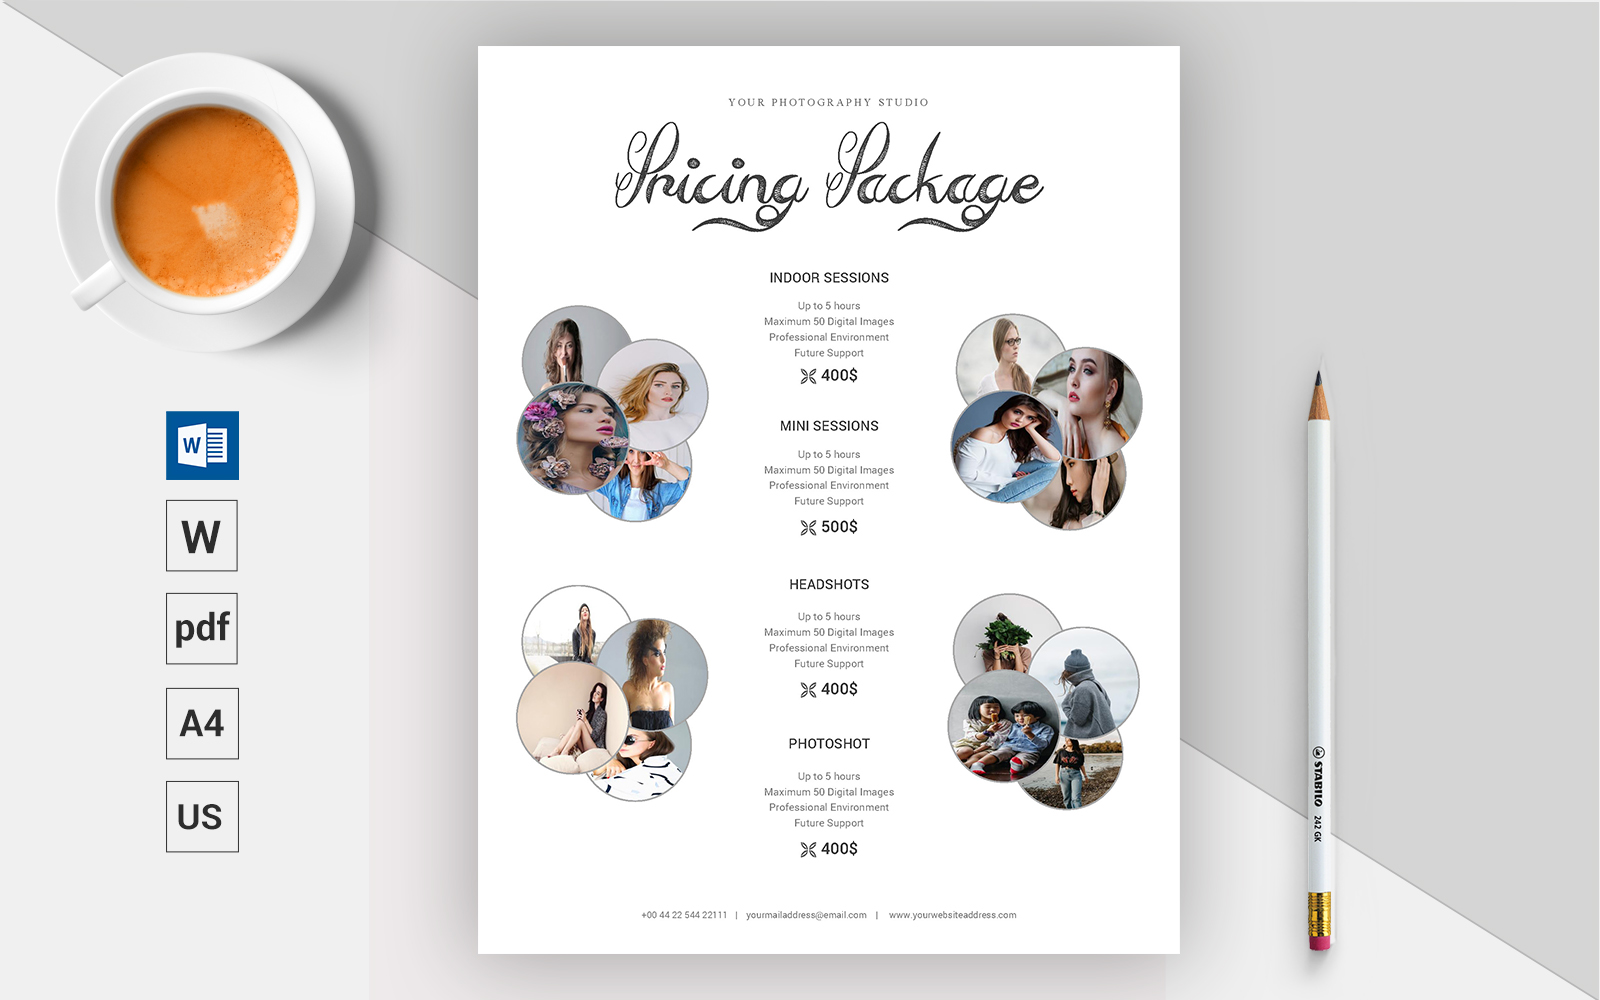 Peter - Photography Pricing List - Corporate Identity Template